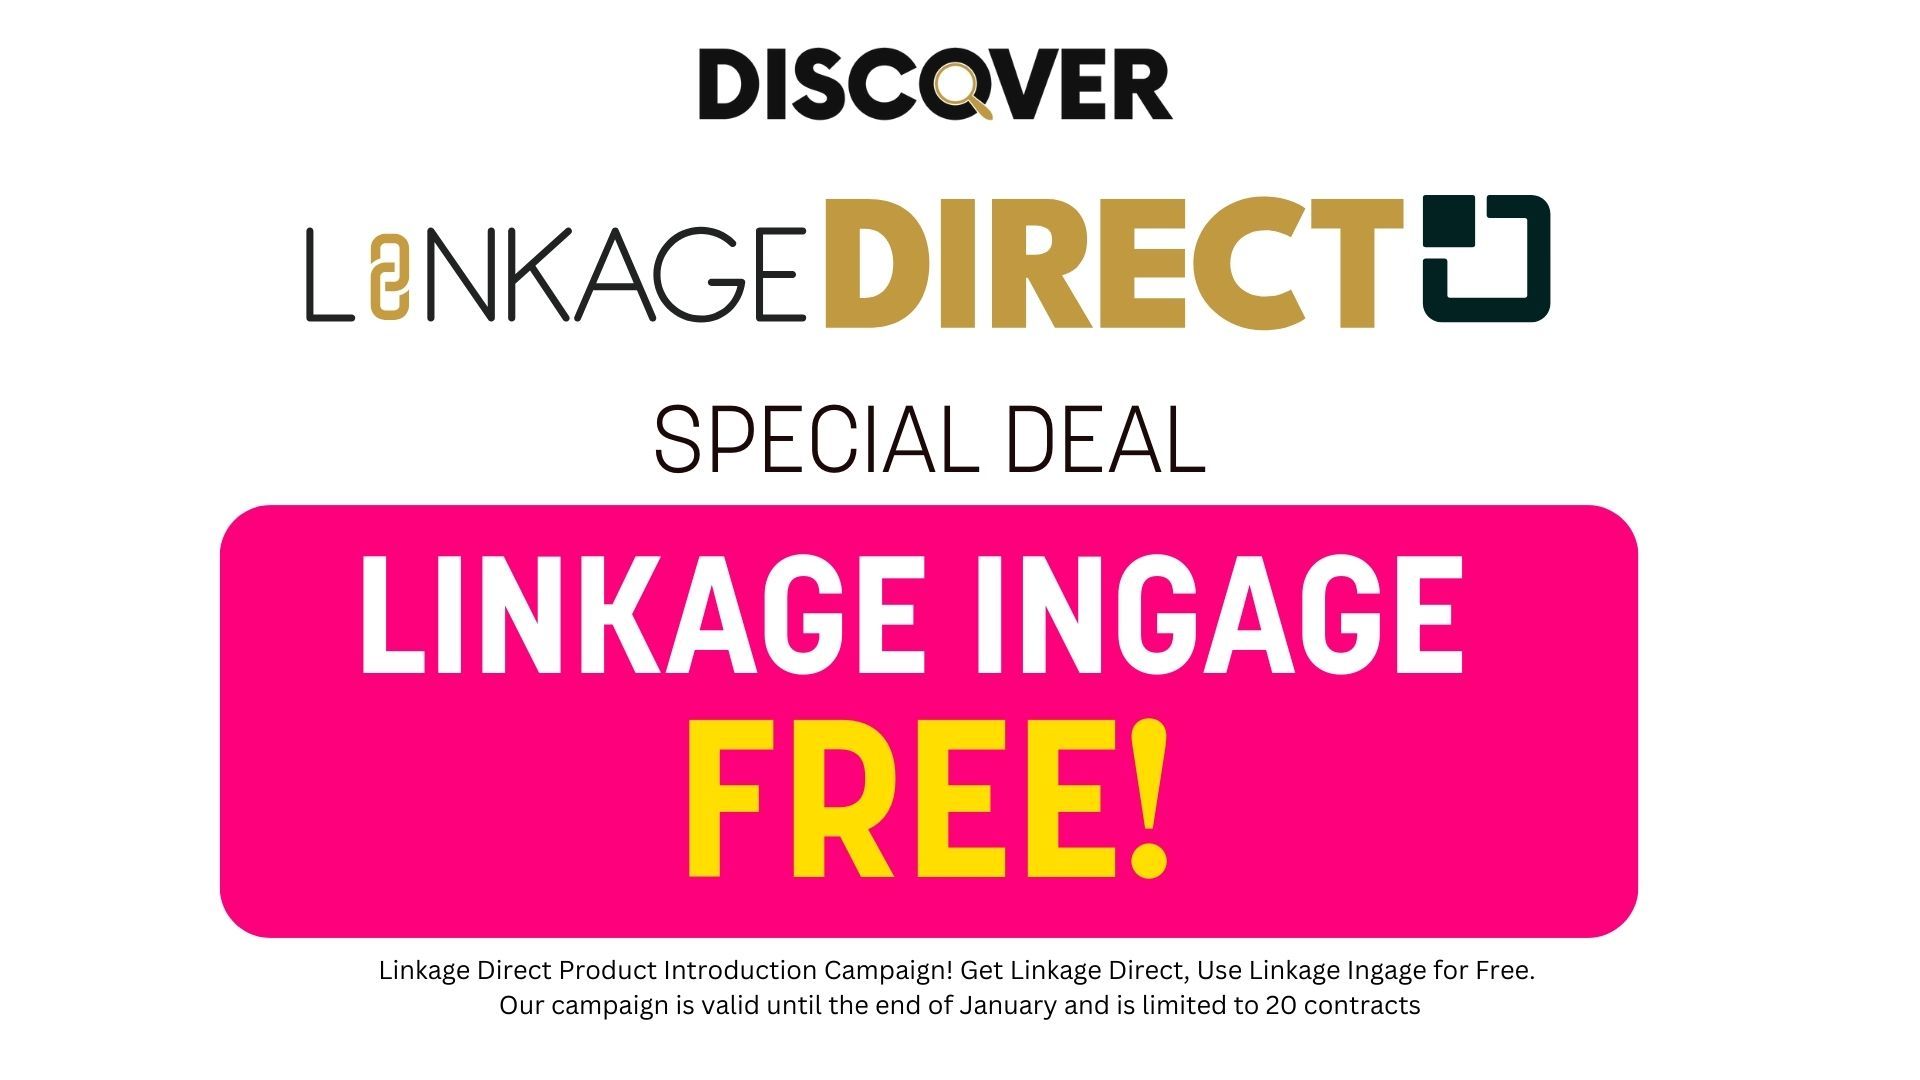 Discover linkage direct special deal linkage inage free !